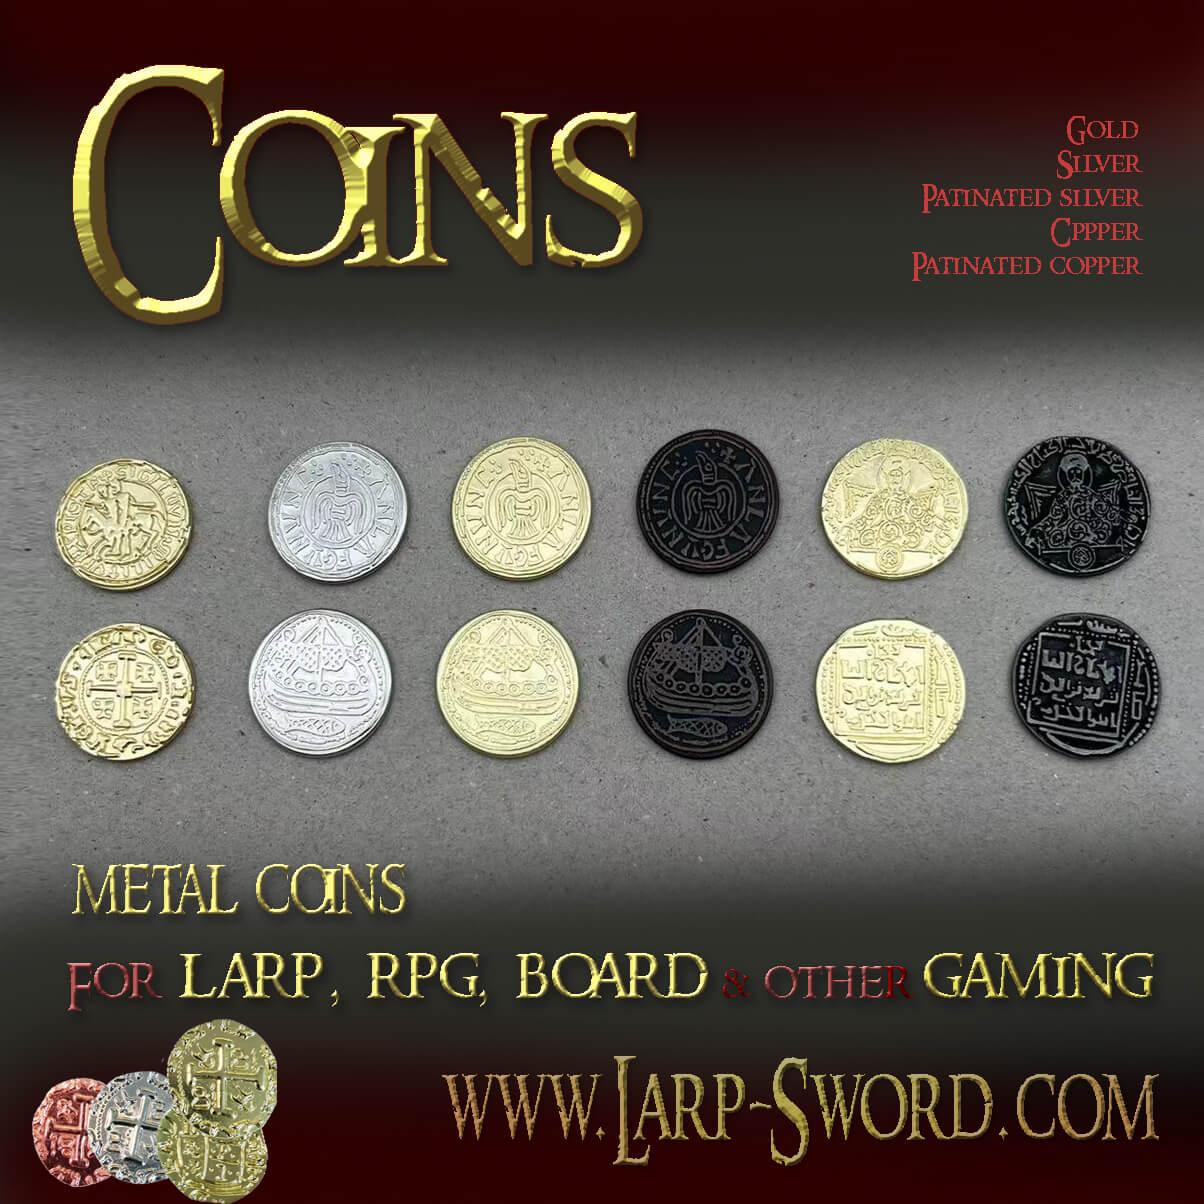 Metal coins for the board game Hegemonic | Currency design, Coins, Coin design